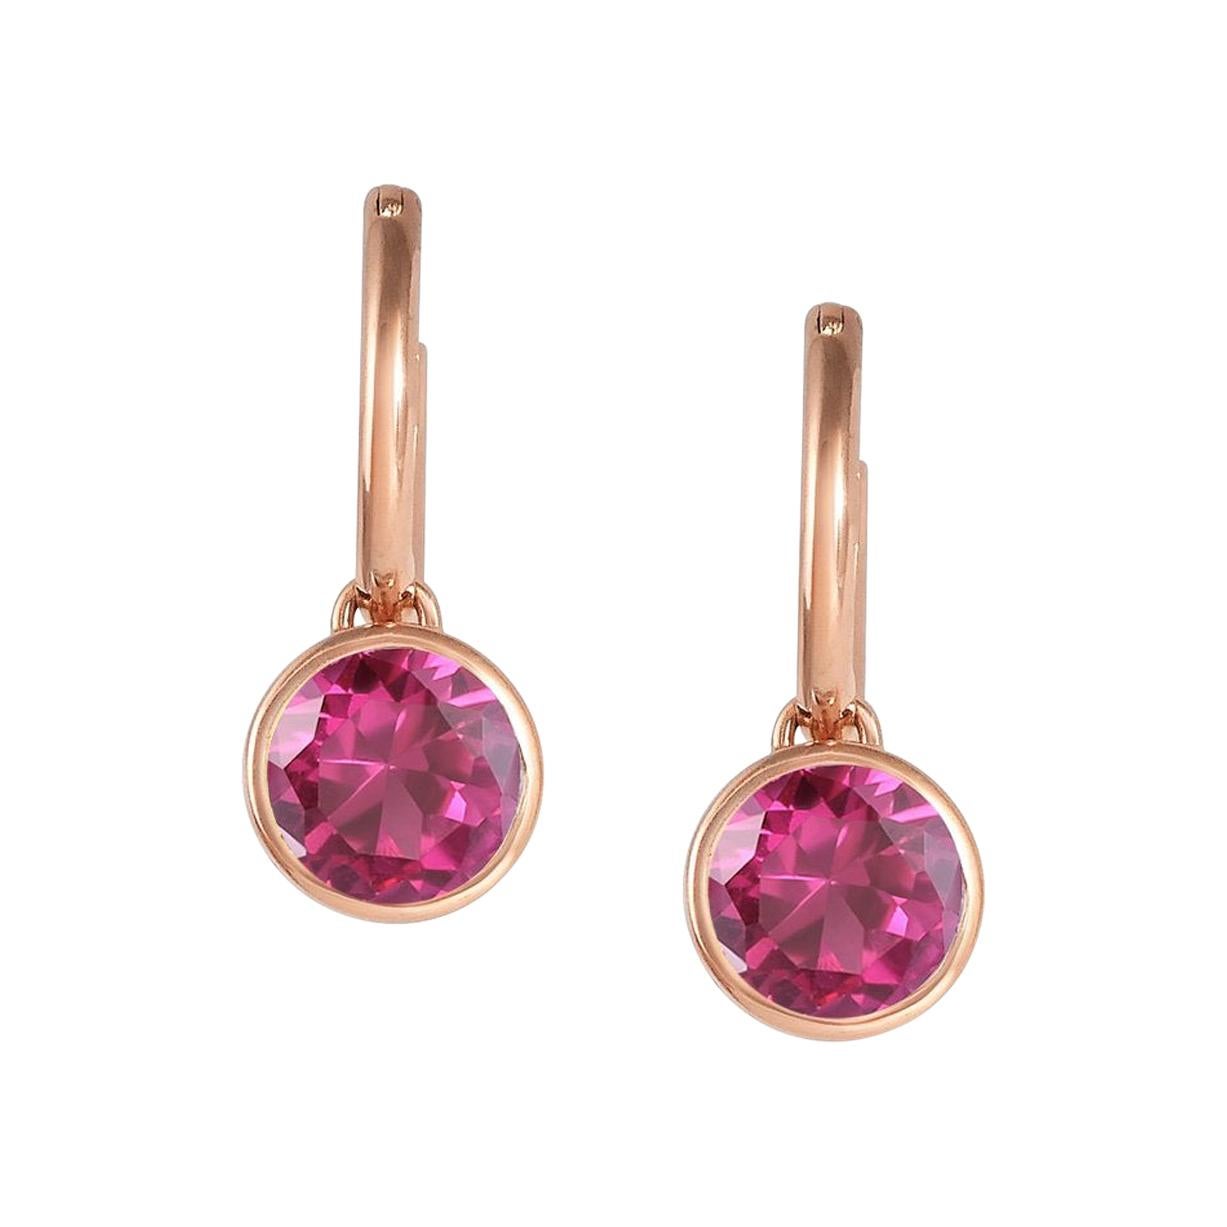 Handcrafted 2.60 Carats Pink Tourmaline 18 Karat Rose Gold Drop Earrings For Sale